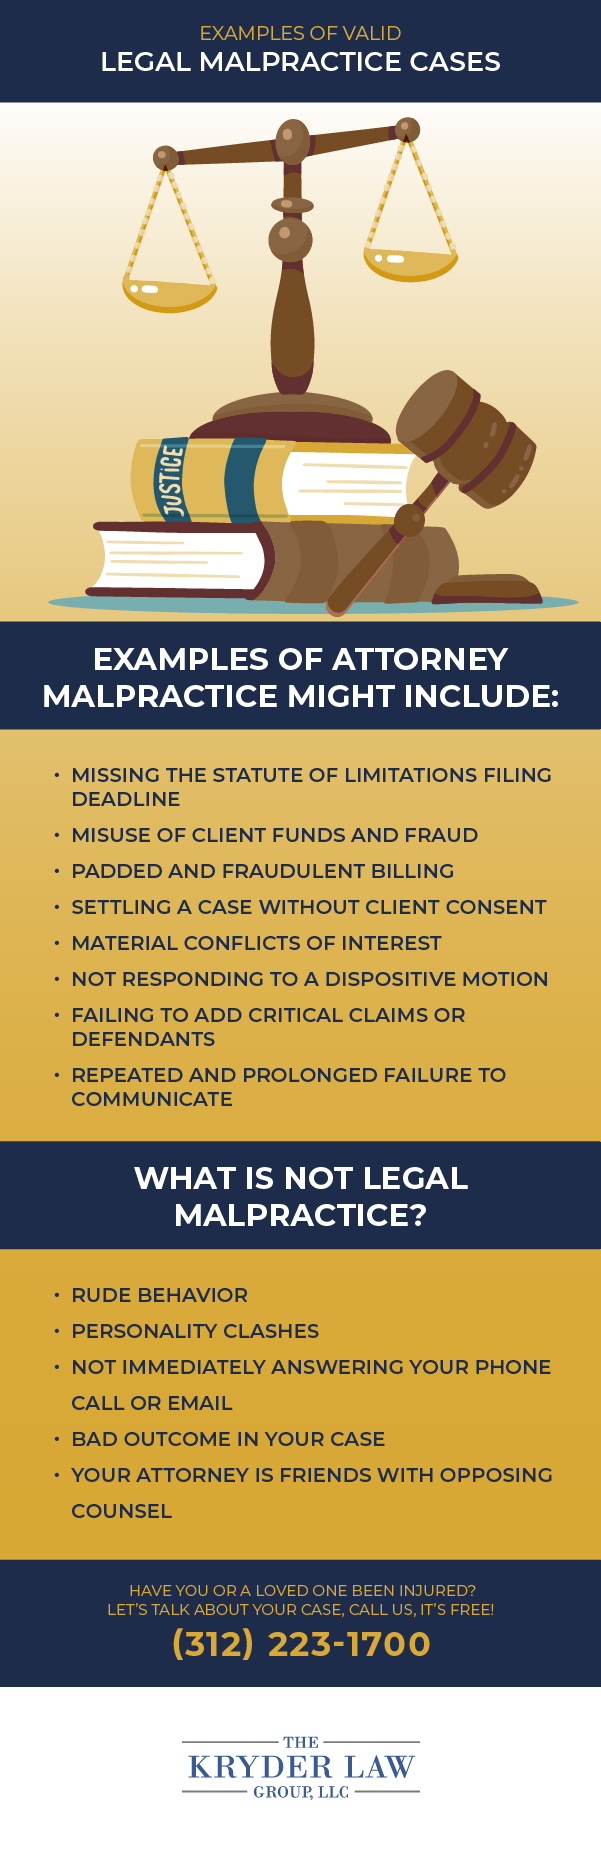 What Are Examples of Legal Malpractice Cases Infographic